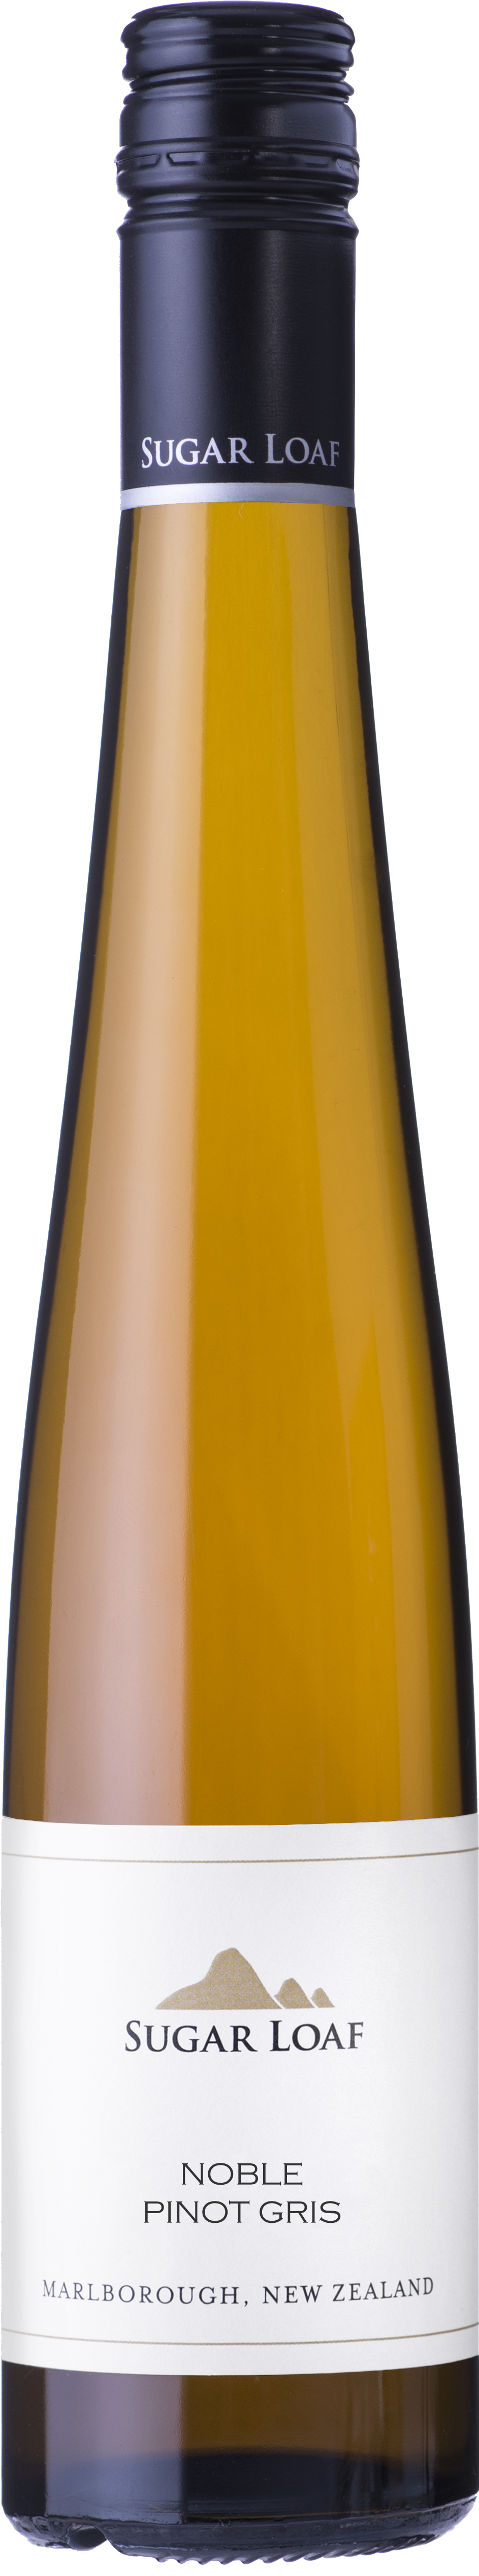 'Noble' Pinot Gris 2018